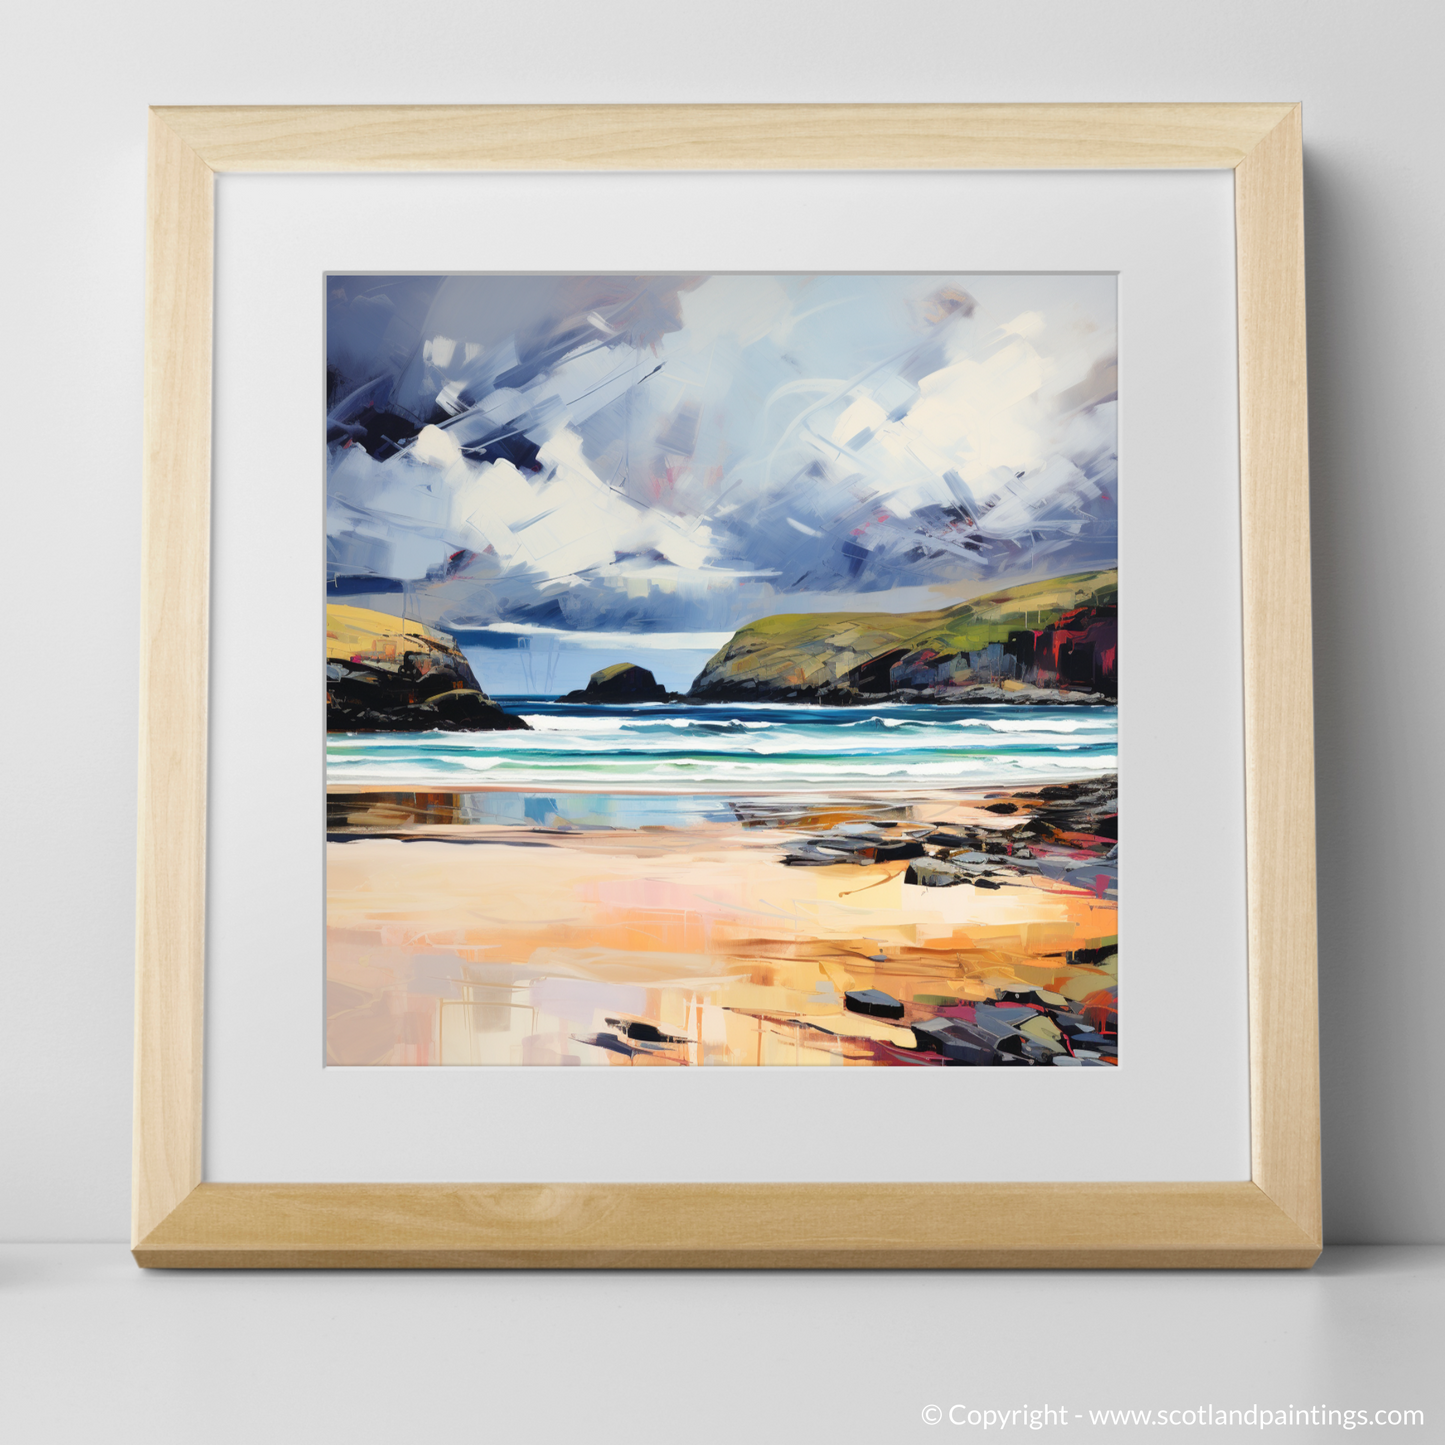 Art Print of Sandwood Bay with a stormy sky with a natural frame